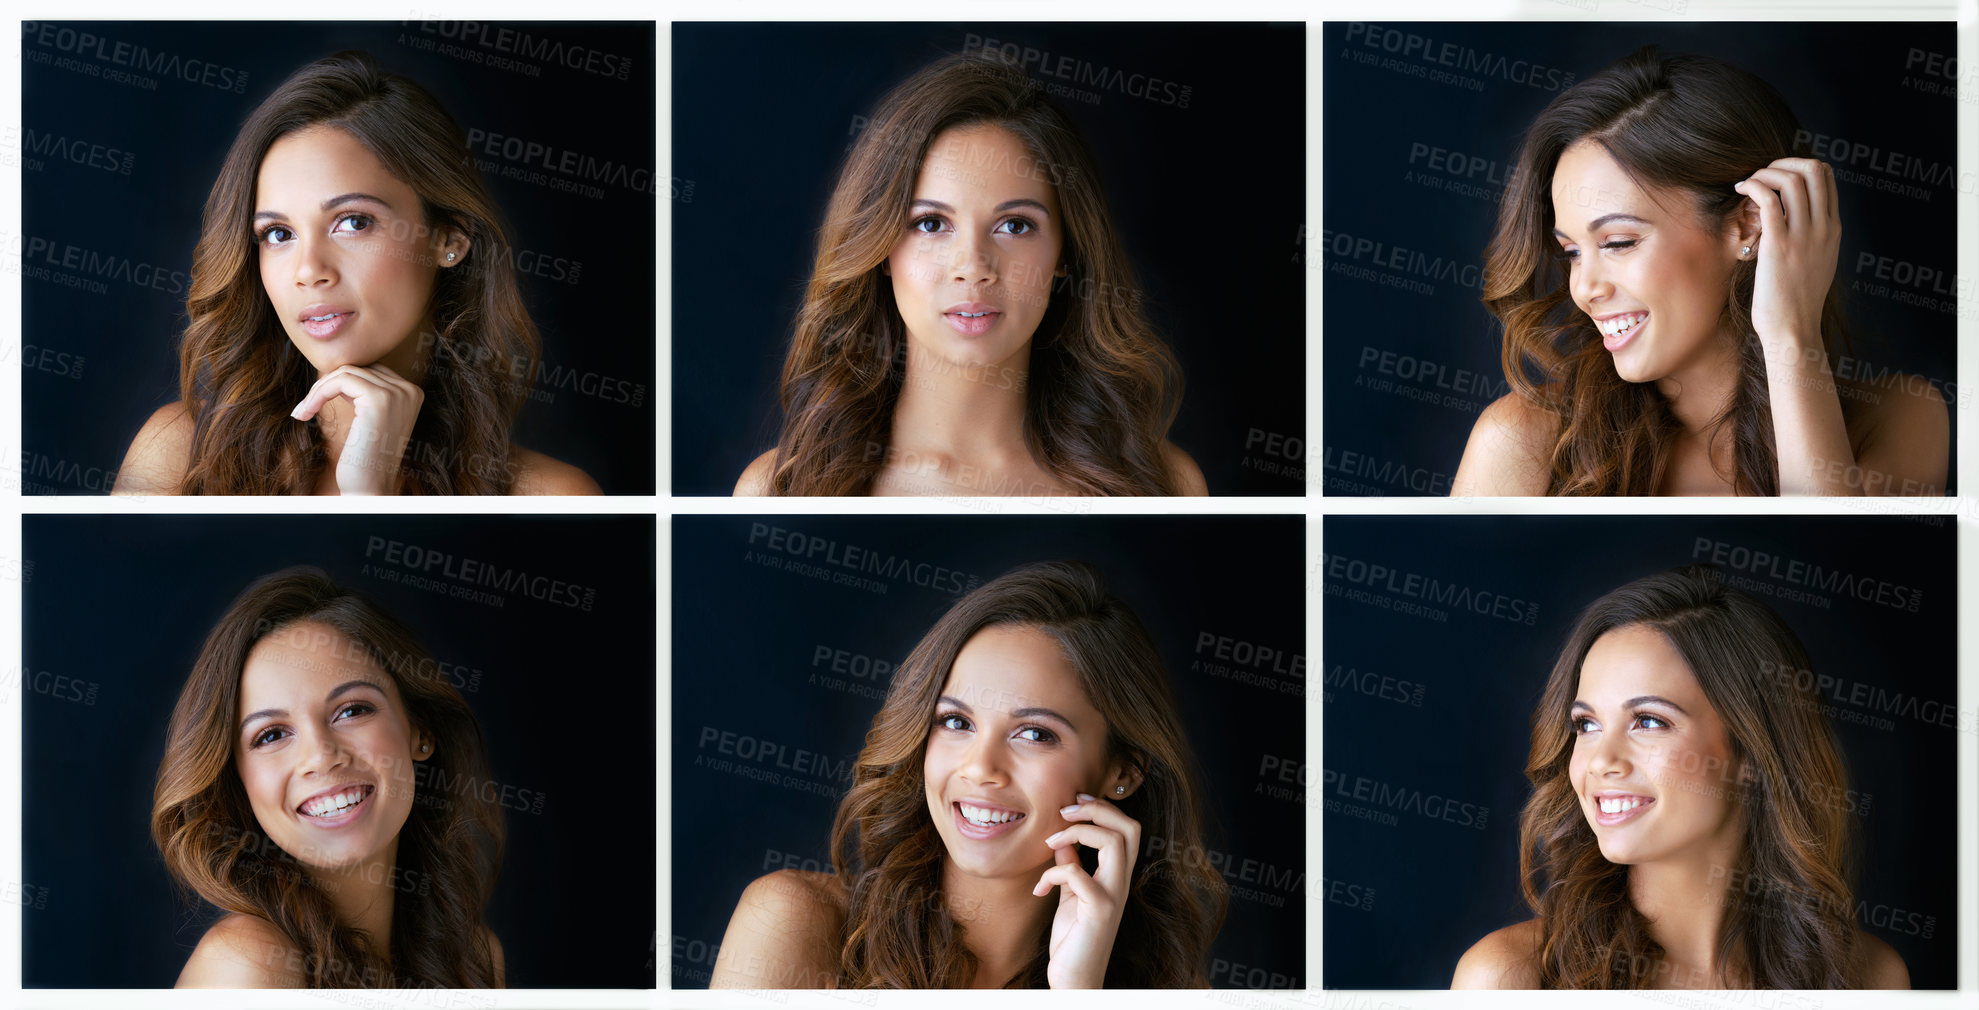 Buy stock photo Composite shot of a beautiful young woman posing against a black background